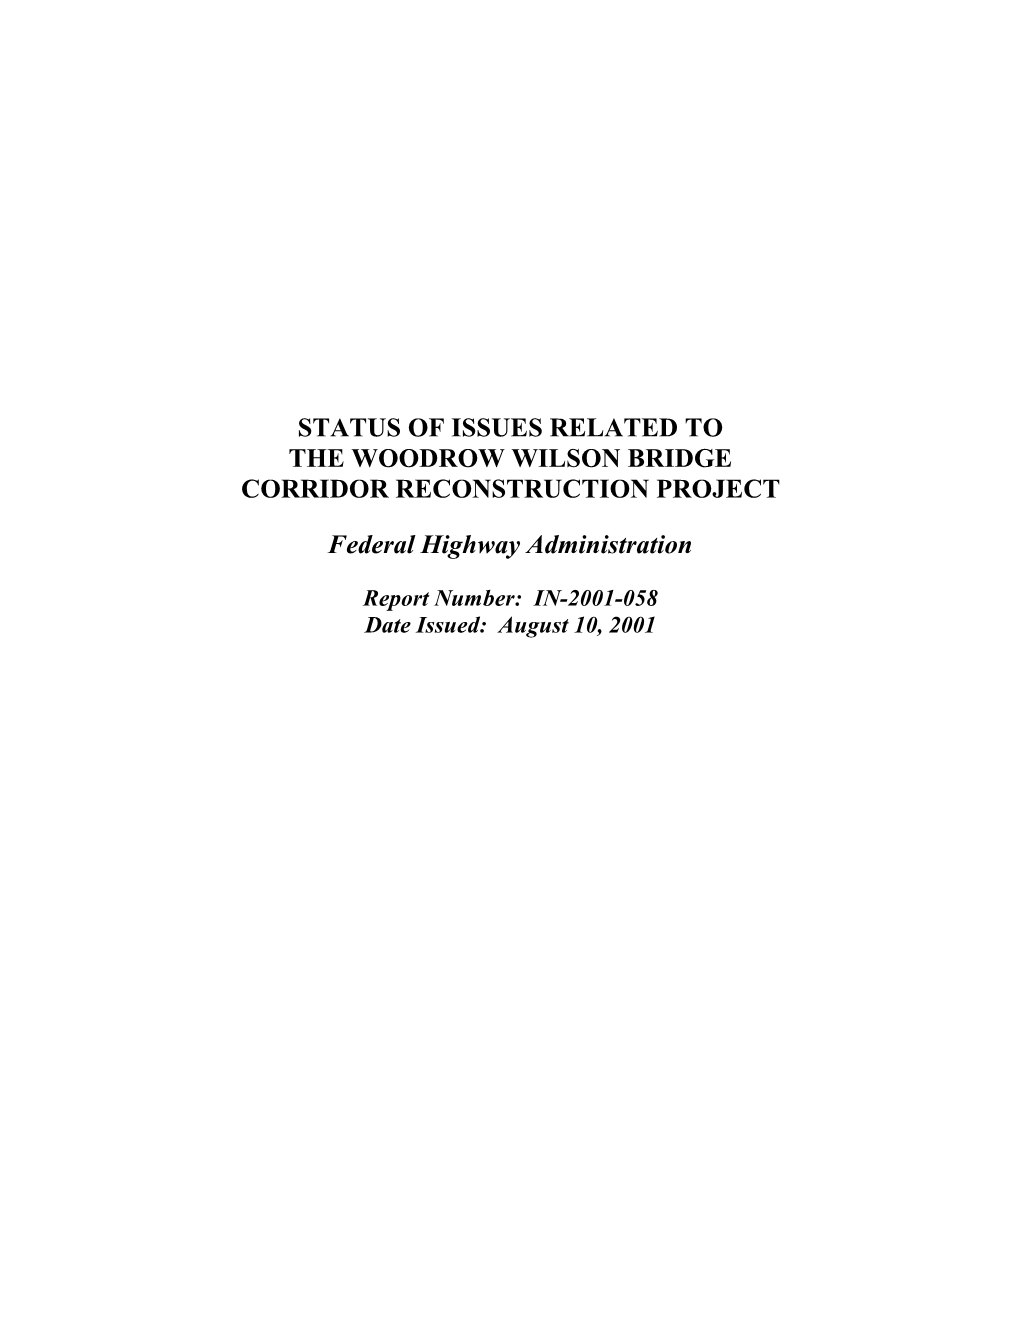 Status of Issues Related to the Woodrow Wilson Bridge Corridor Reconstruction Project